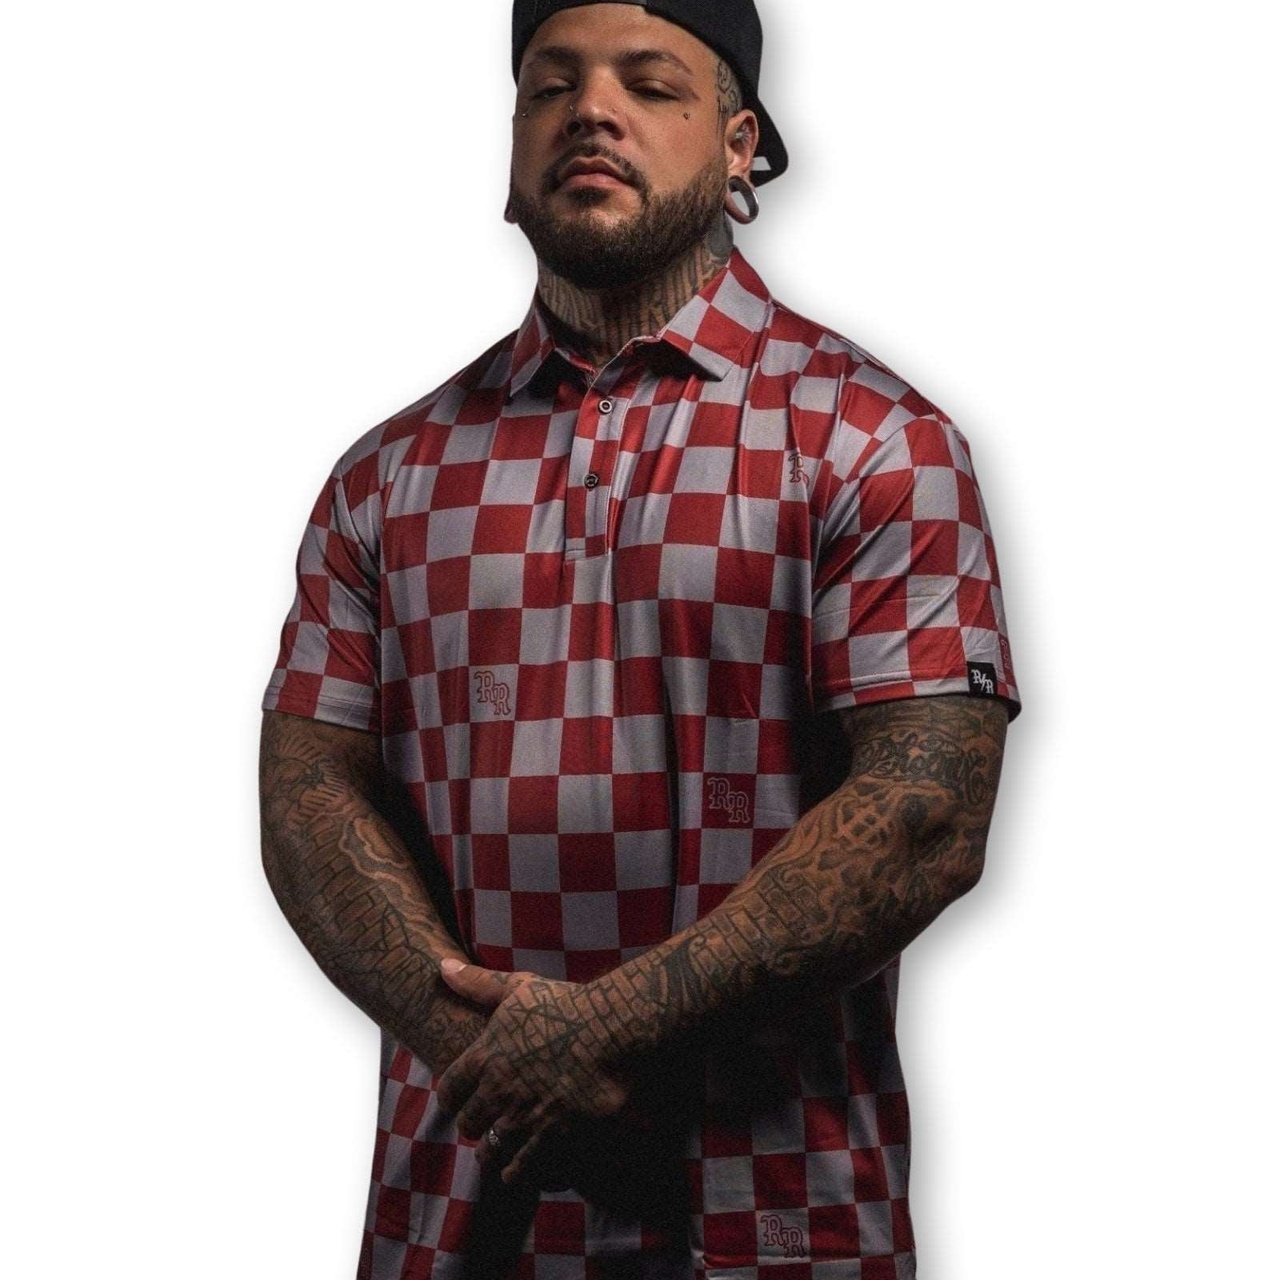 Red & Grey Checkered Polo - Rebel Reaper Clothing Company Polo